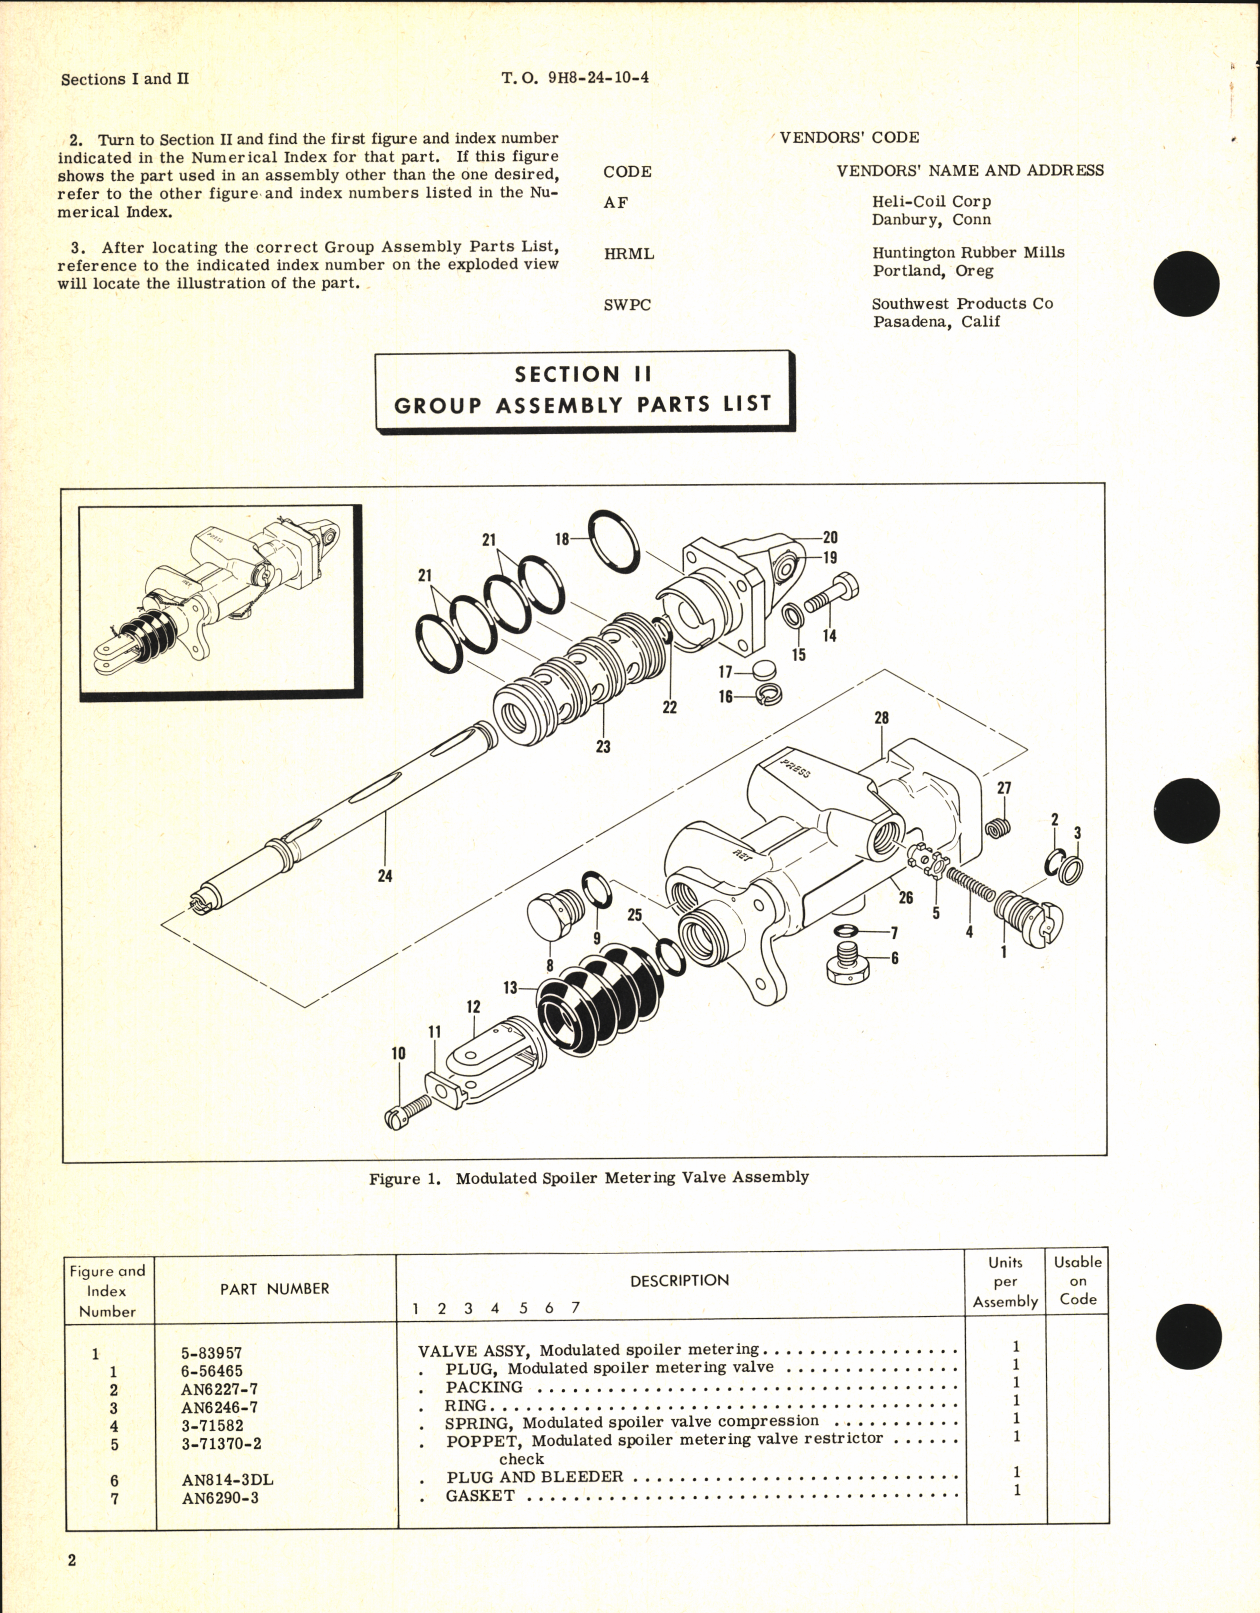 Sample page 2 from AirCorps Library document: Illustrated Parts Breakdown for Modulated Spoiler Metering Valve Assembly Part No. 5-83957